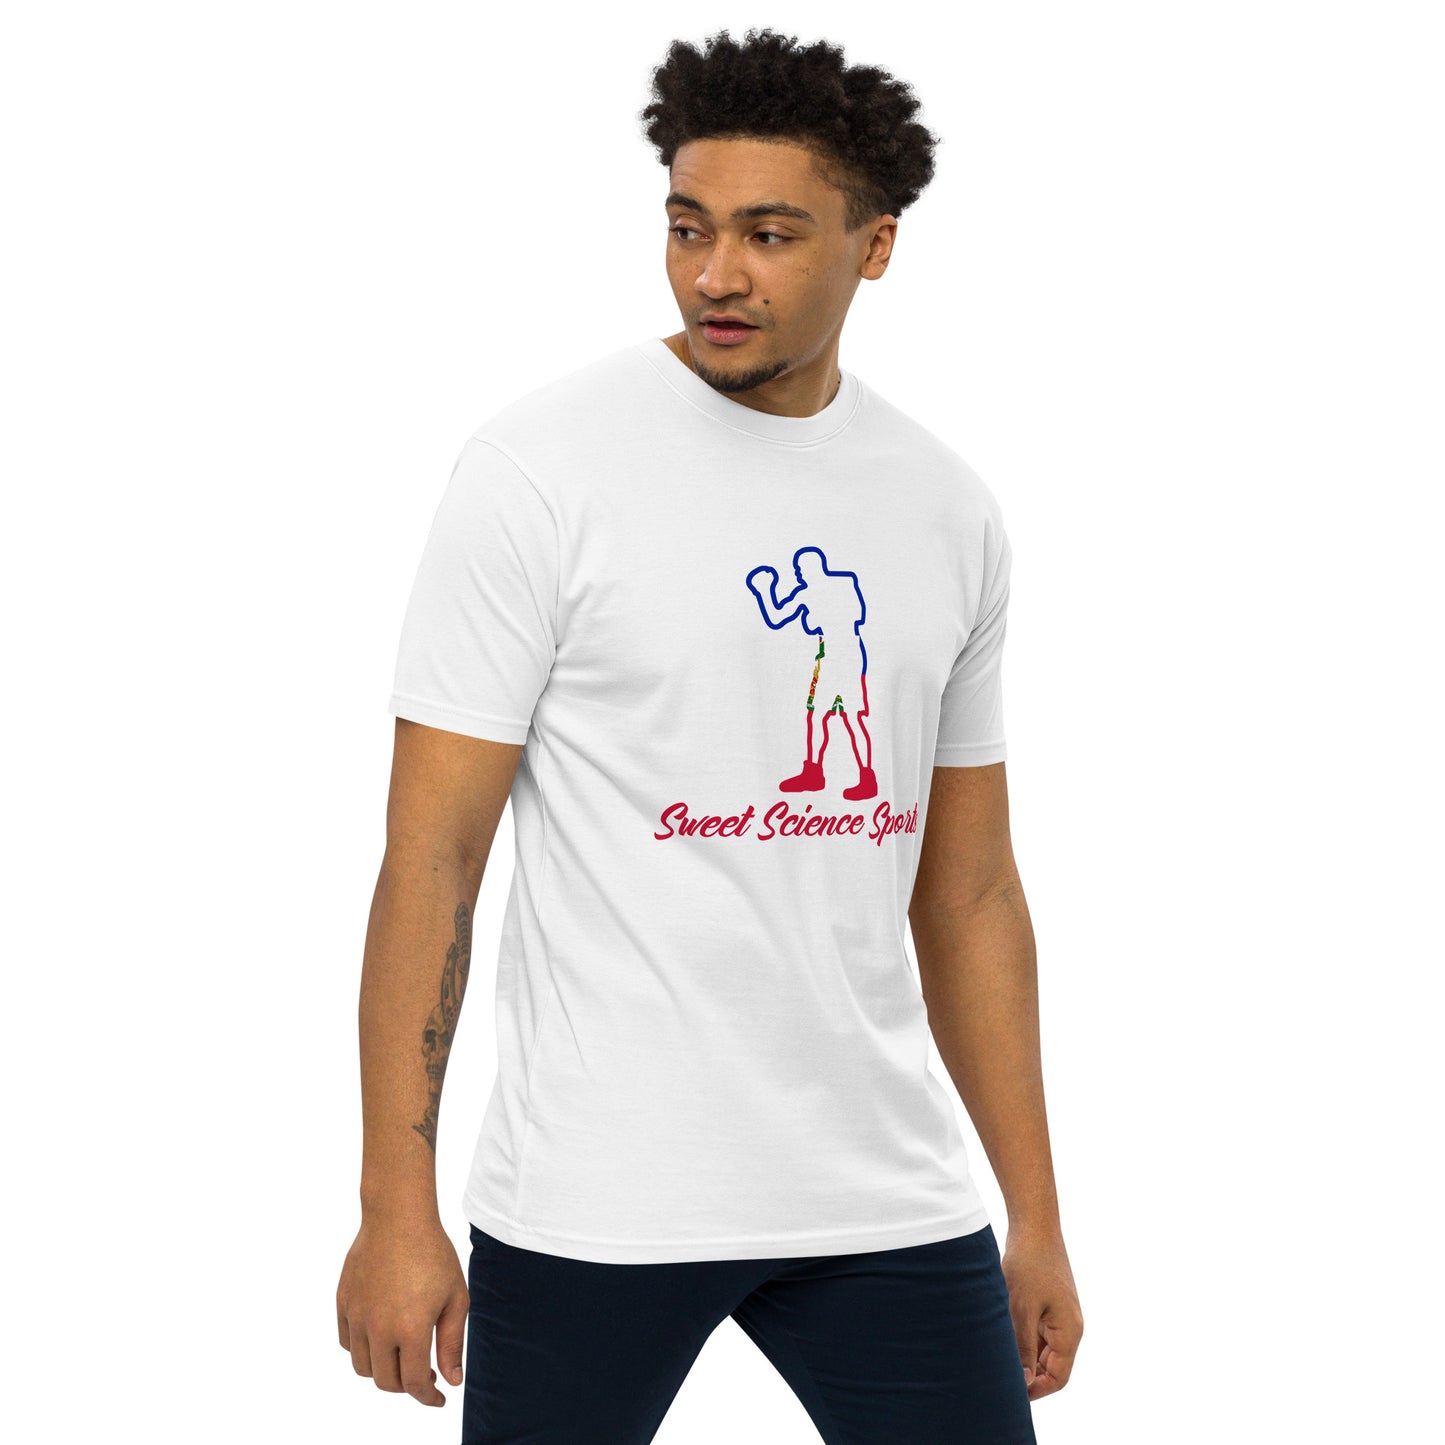 Sweet Science Sports The Boxer  heavyweight tee